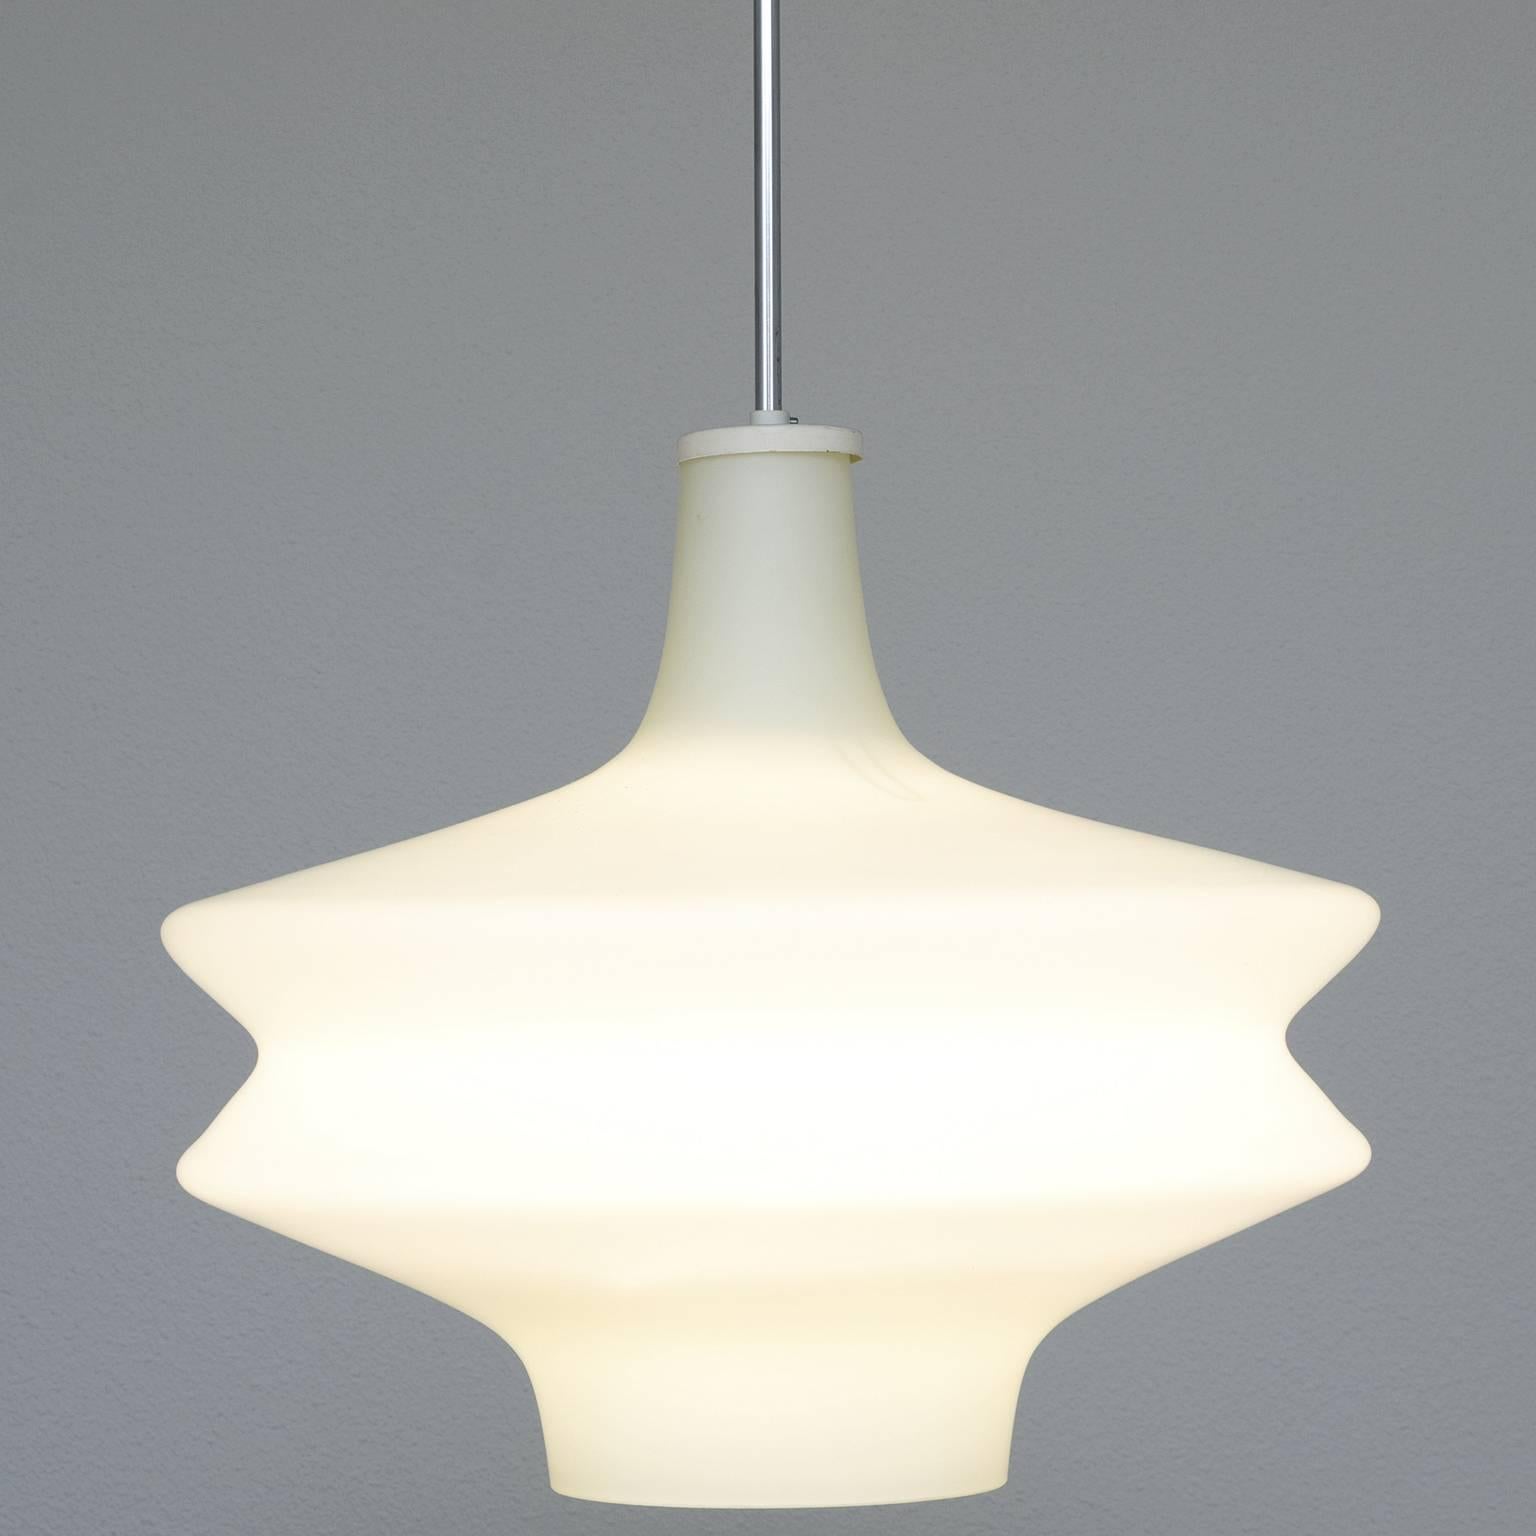 Pendant, opaline glass, metal, Europe, 1970s.

This lush, curvy shape is built up of two symmetrical tapered shapes that are connected at their wide end. The organic shapes combined with opaline glass results in a stunning soft light partition.